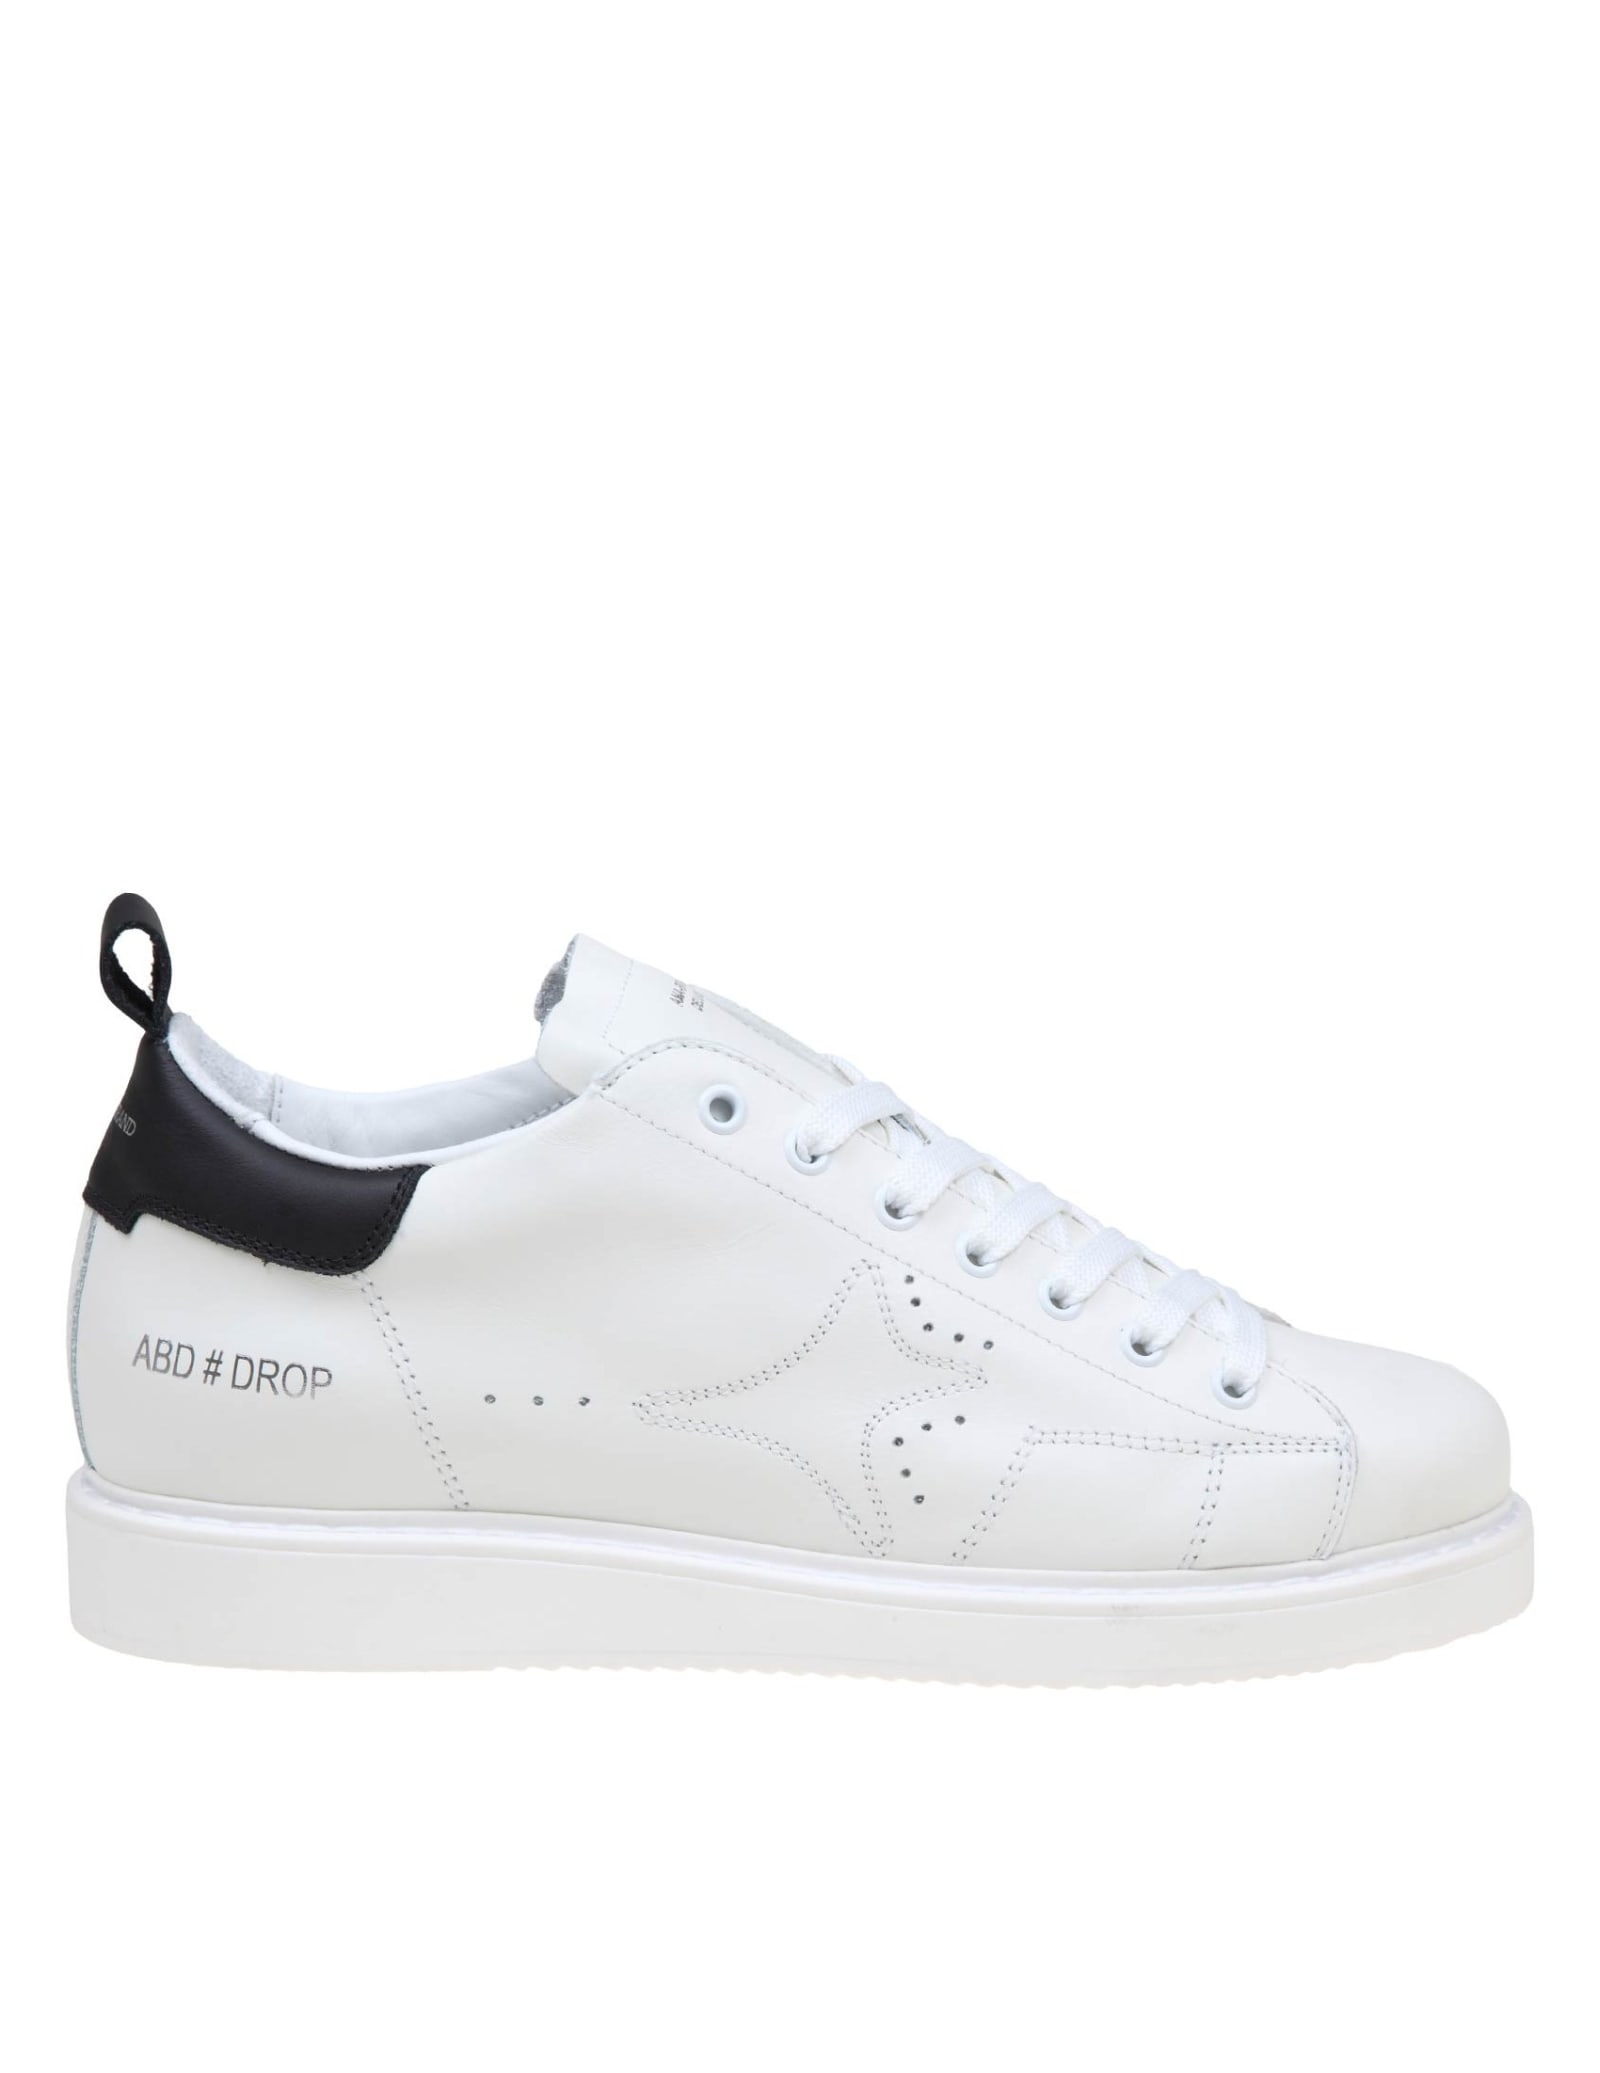 Shop Ama Brand Black And White Leather Sneakers In White/black